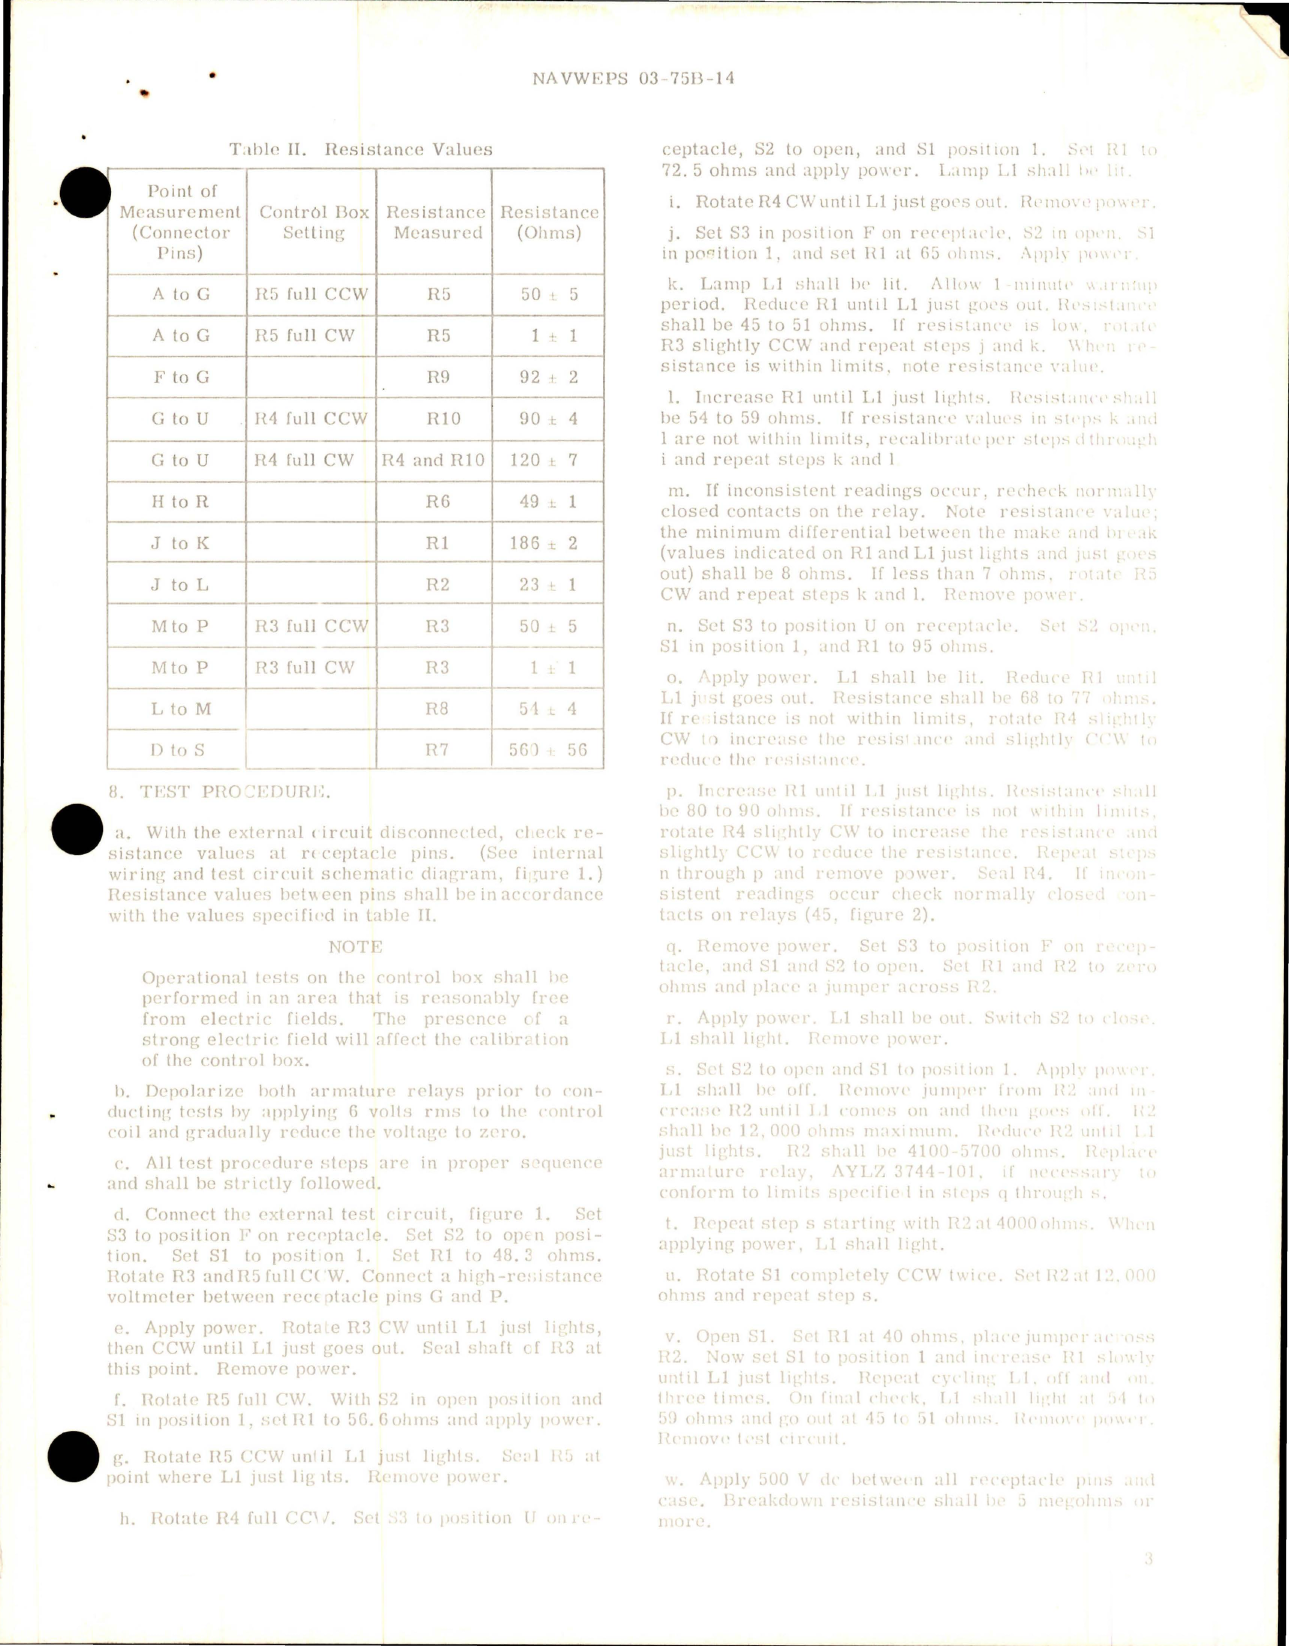 Sample page 7 from AirCorps Library document: Overhaul Instructions with Parts Breakdown for Control Box Assembly - Part CYLZ 4271-2 